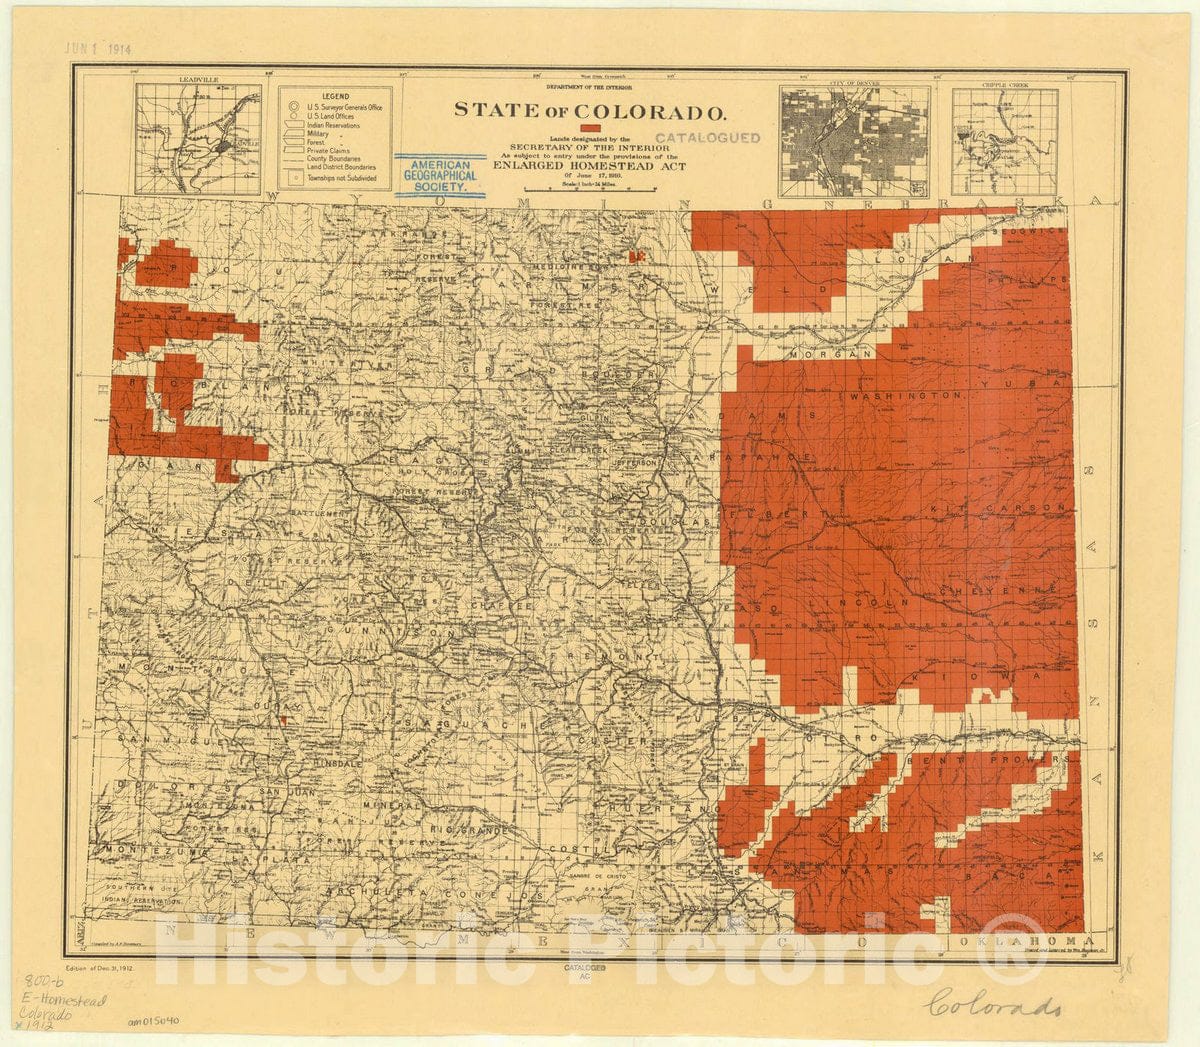 Map : Colorado 1912, State of Colorado : lands designated by the Secretary of the Interior as subject to entry under the provisions of the Enlarged Homestead Act